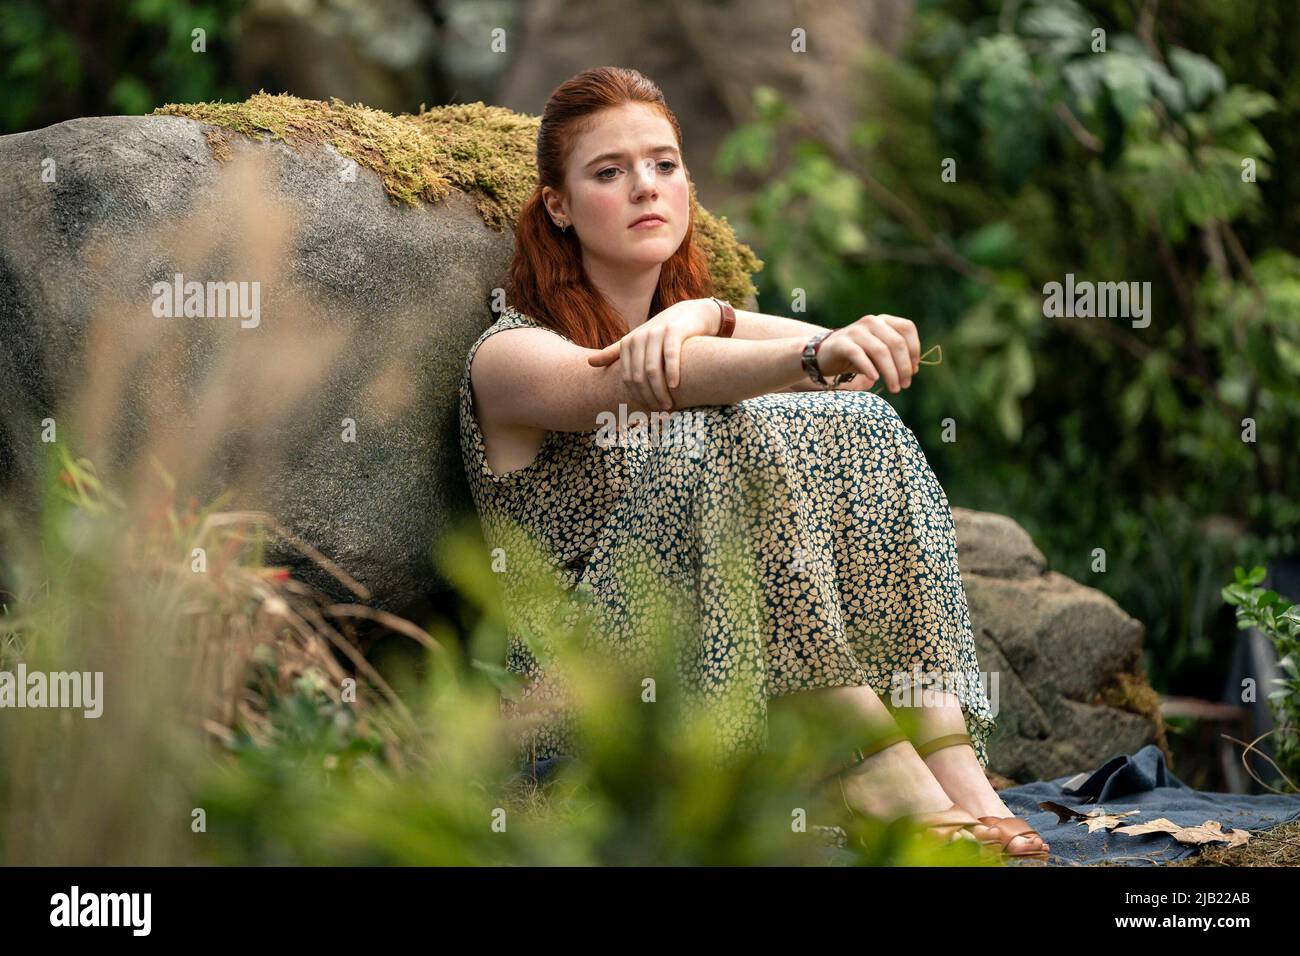 ROSE LESLIE in THE TIME TRAVELER'S WIFE (2022), directed by DAVID NUTTER. Credit: WARNER BROS. TELEVISION / Album Stock Photo